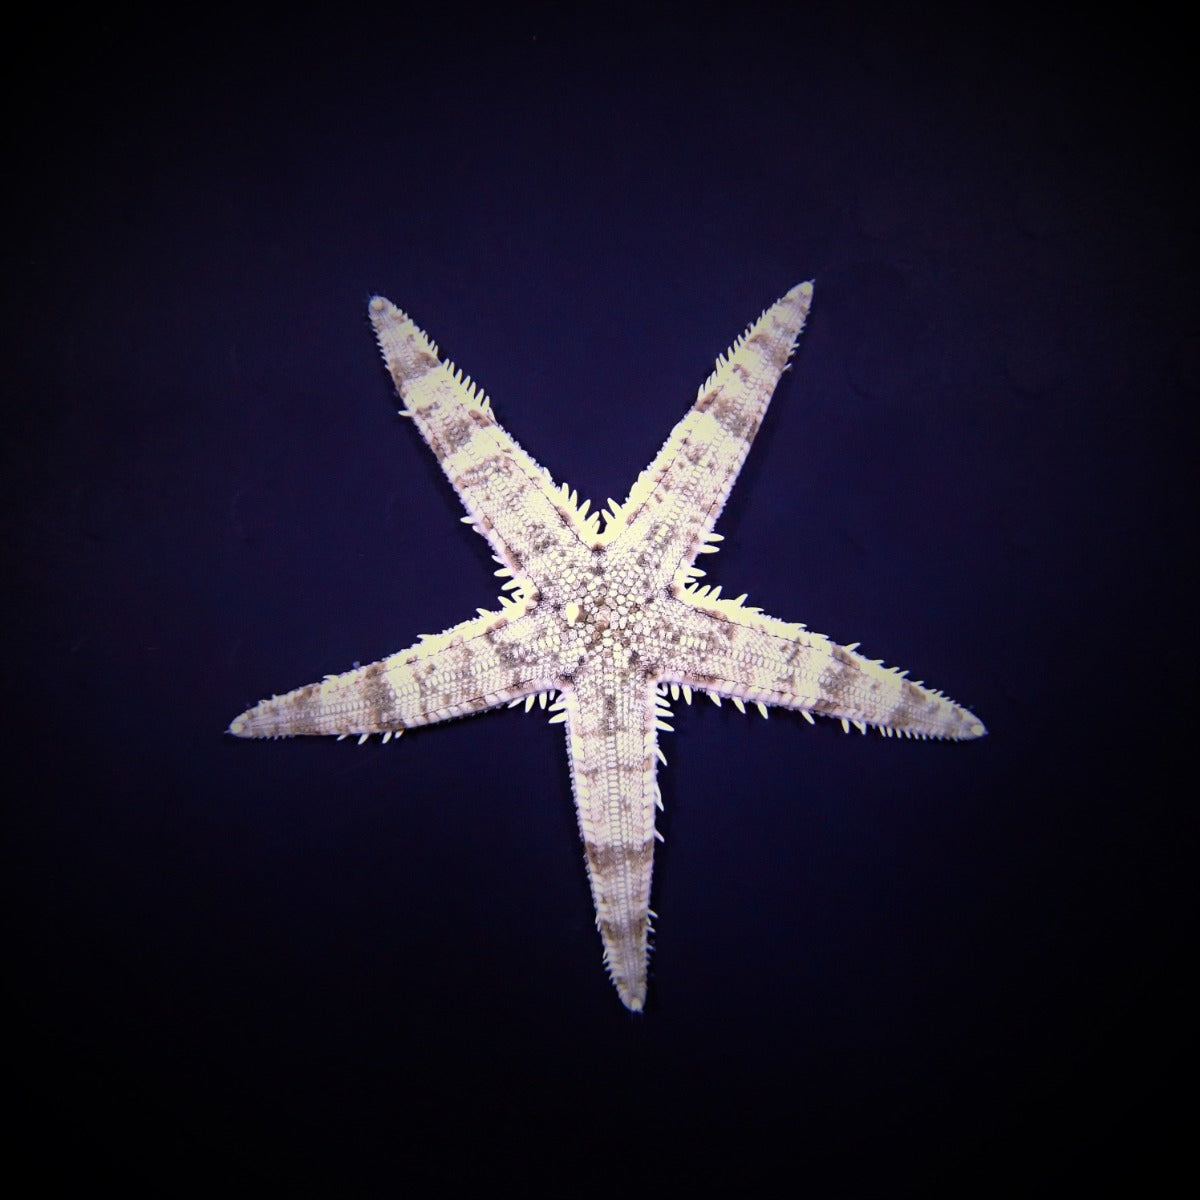 Archaster typicus - Sand sifting seastar